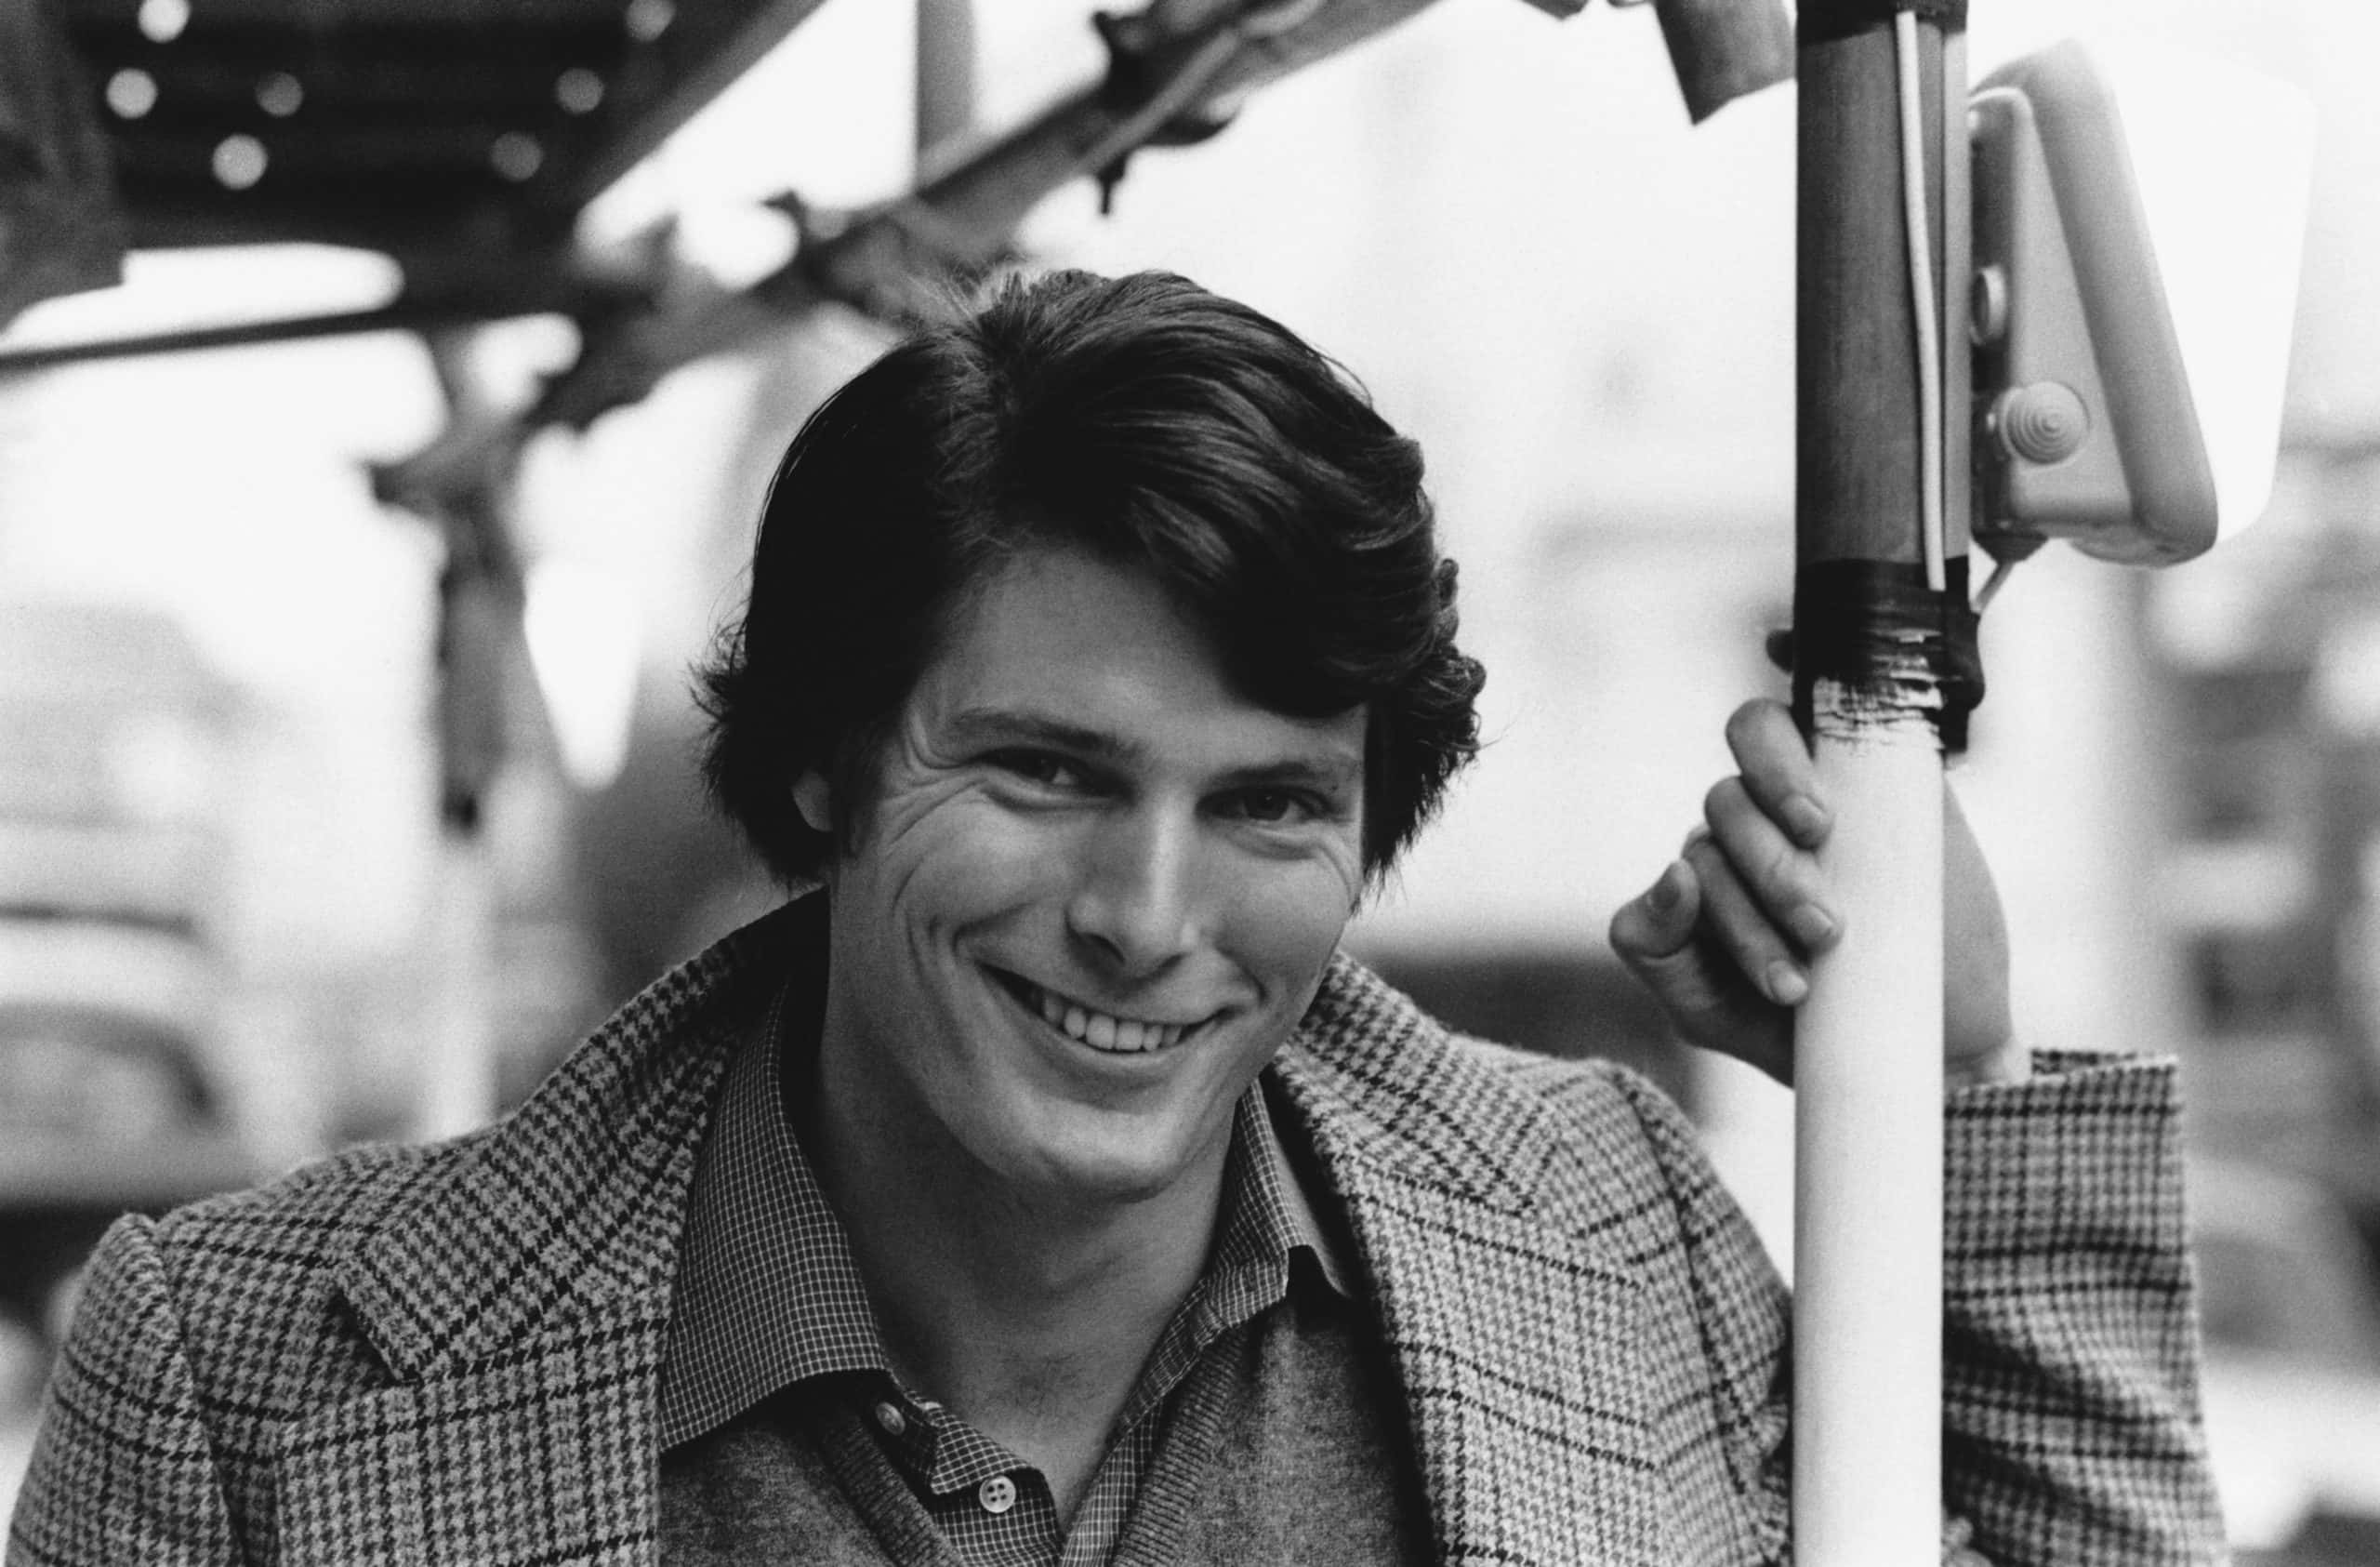 Christopher Reeve Facts 